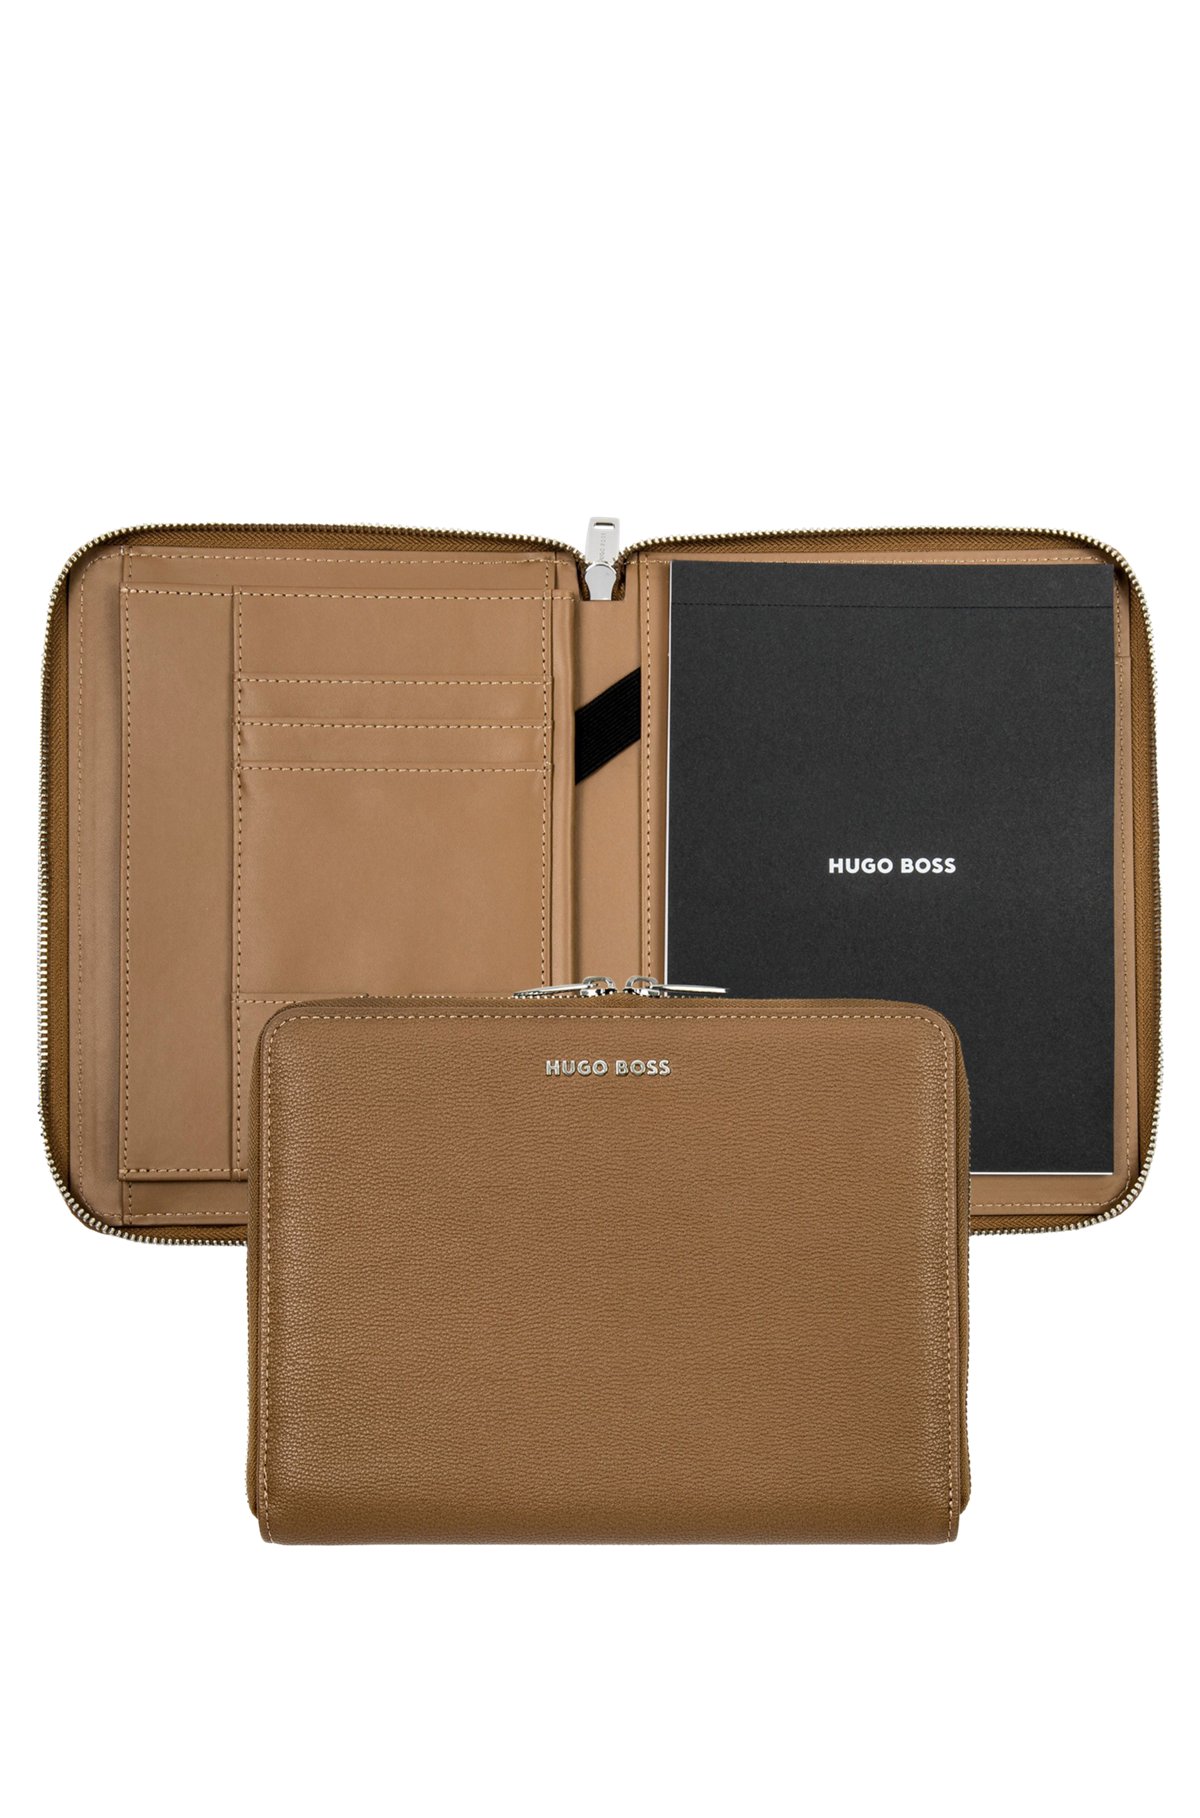 Camel A5 conference folder in pebble-textured faux leather, Brown